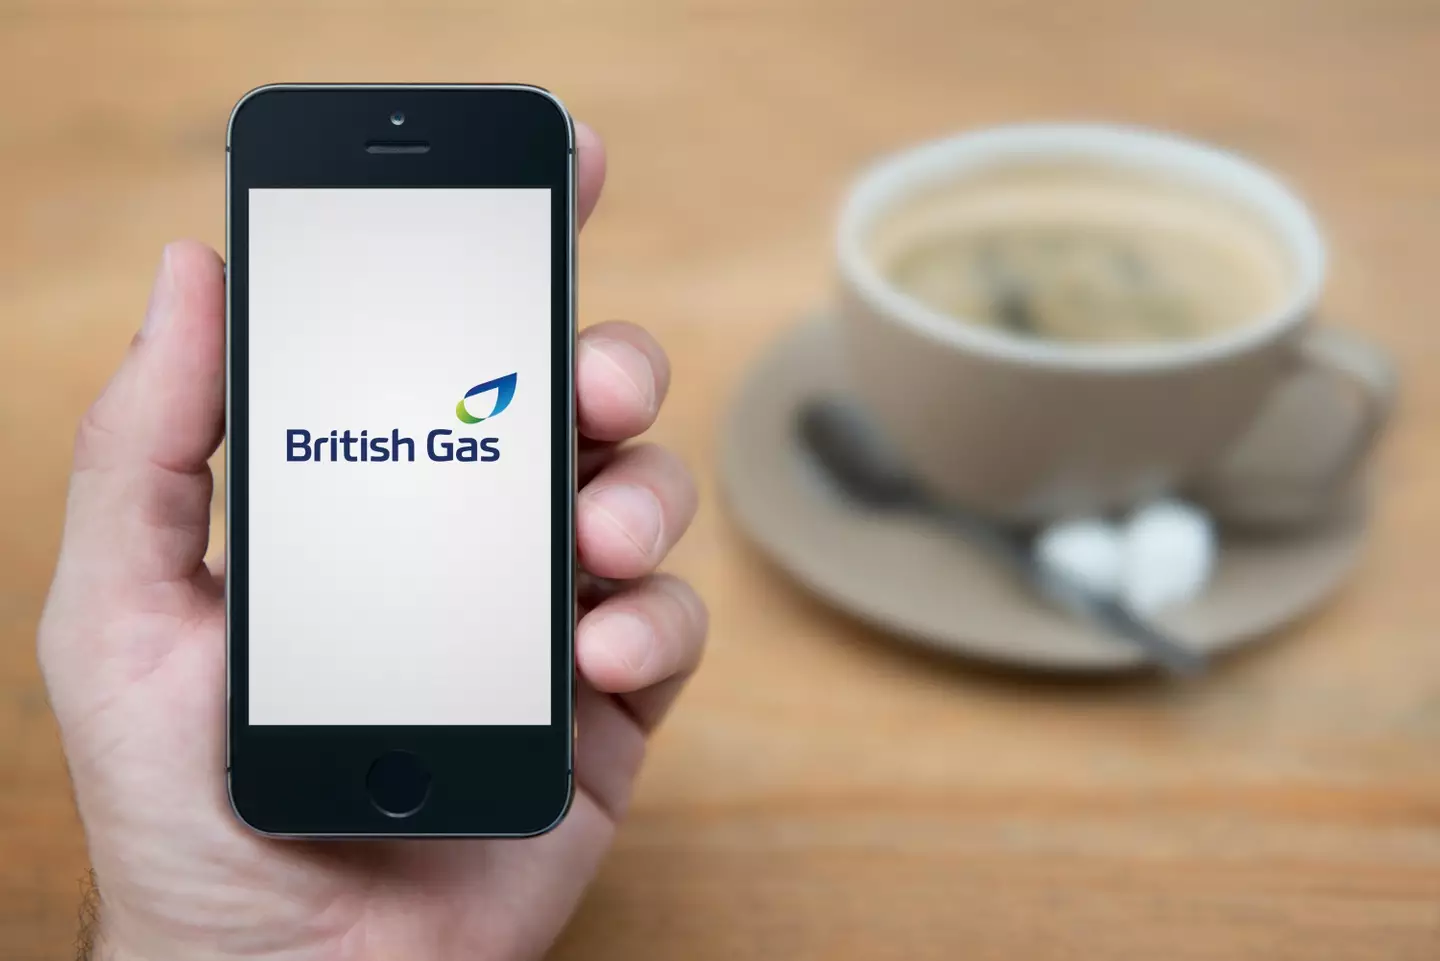 Martin explained that British Gas and E.On could potentially offer existing customers fixed rates below 30 percent.